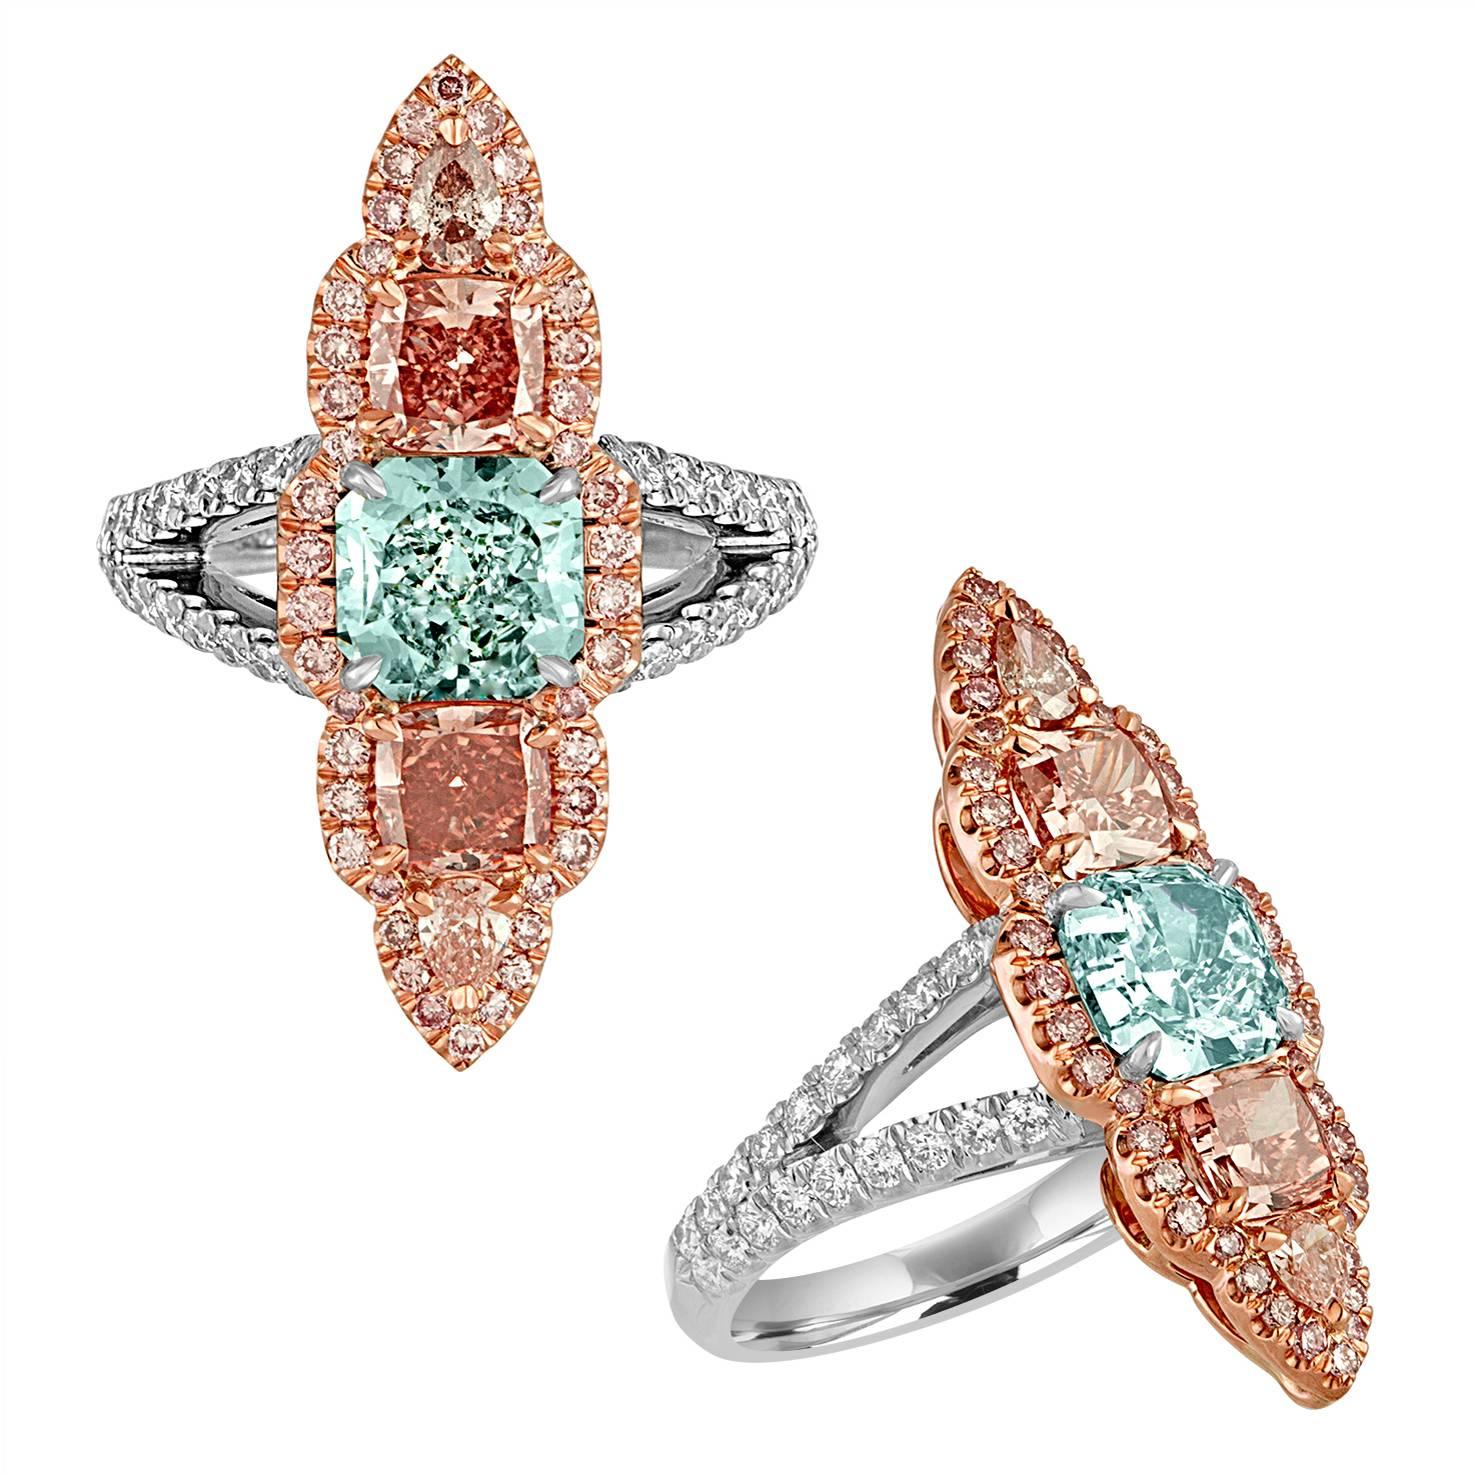 1.57 Carat Cushion GIA Fancy Blue Green in Color and SI1 in Clarity, 0.61 Carat Cushion GIA Certified Fancy Intense Orangey Pink in Color and VS2 in Clarity plus 0.58 Carat Cushion Fancy Deep Orangey Pink in Color and VVS2 in Clarity are set in 18K